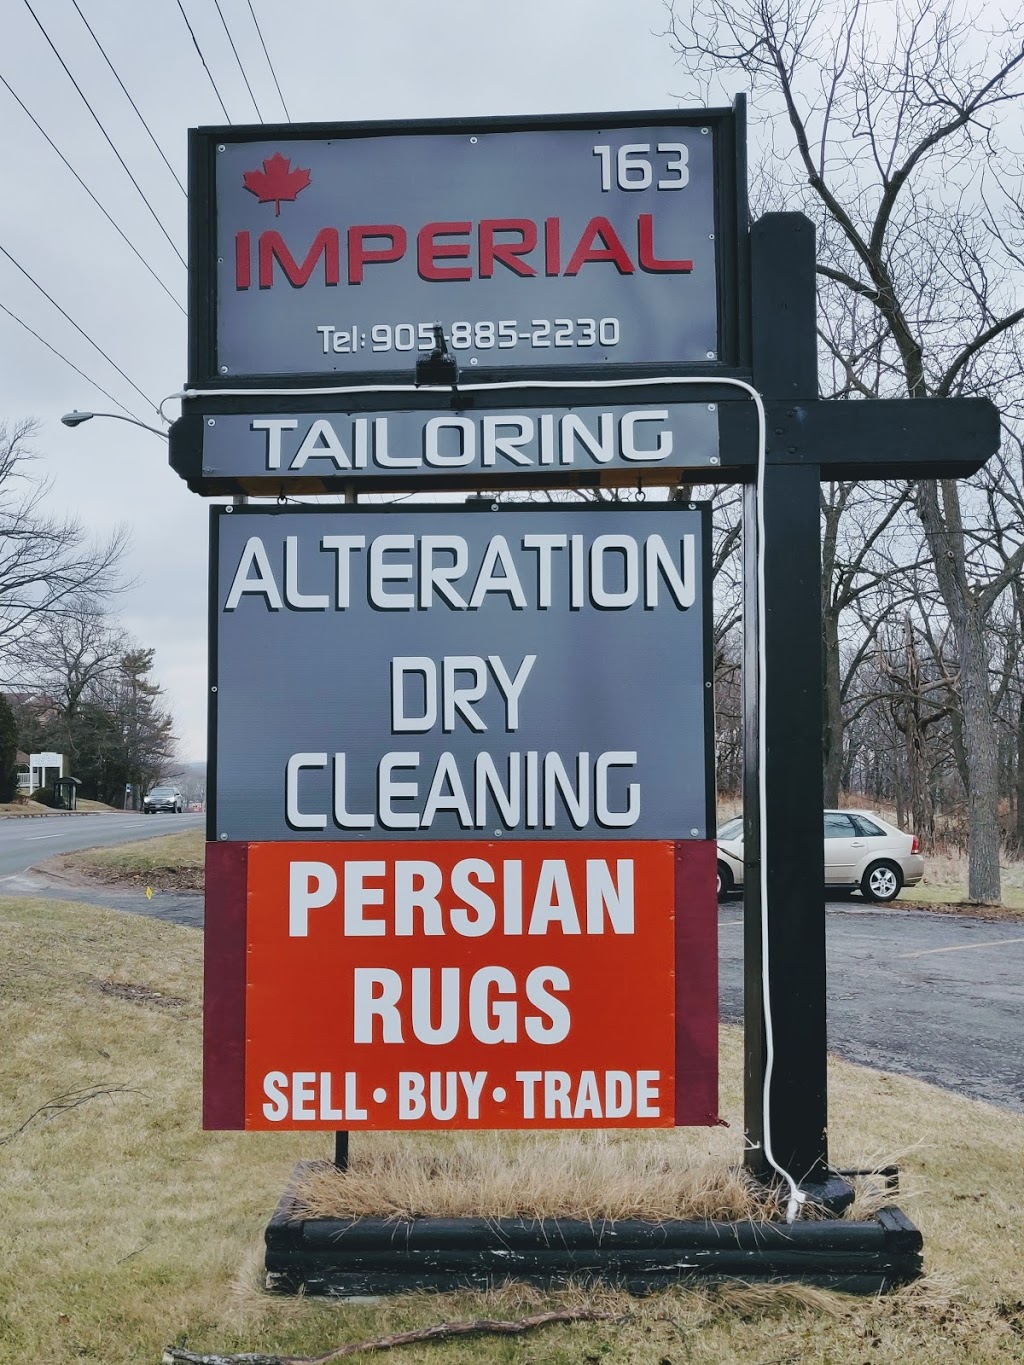 Imperial Tailoring/Alterations & Persian rugs | clothing store | 163 Peter St, Port Hope, ON L1A 1C7, Canada | 9058852230 OR +1 905-885-2230